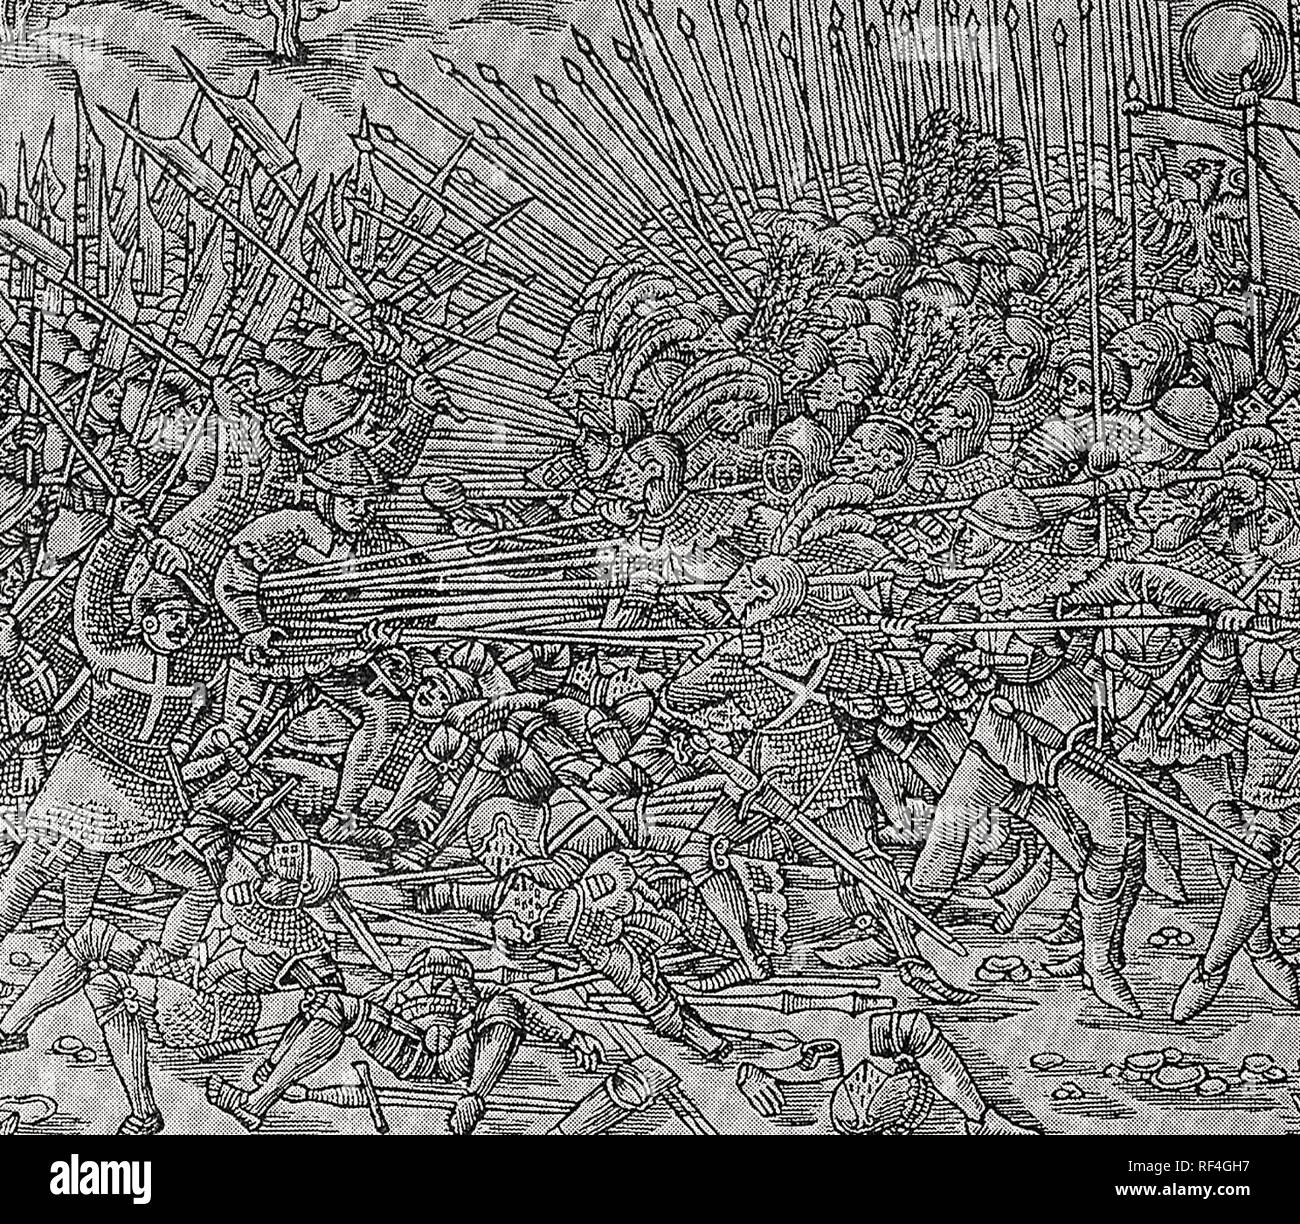 The Battle of Sempach - The Battle of Sempach was fought on 9 July 1386, between Leopold III, Duke of Austria and the Old Swiss Confederacy. The battle was a decisive Swiss victory in which Duke Leopold and numerous Austrian nobles died. Stock Photo